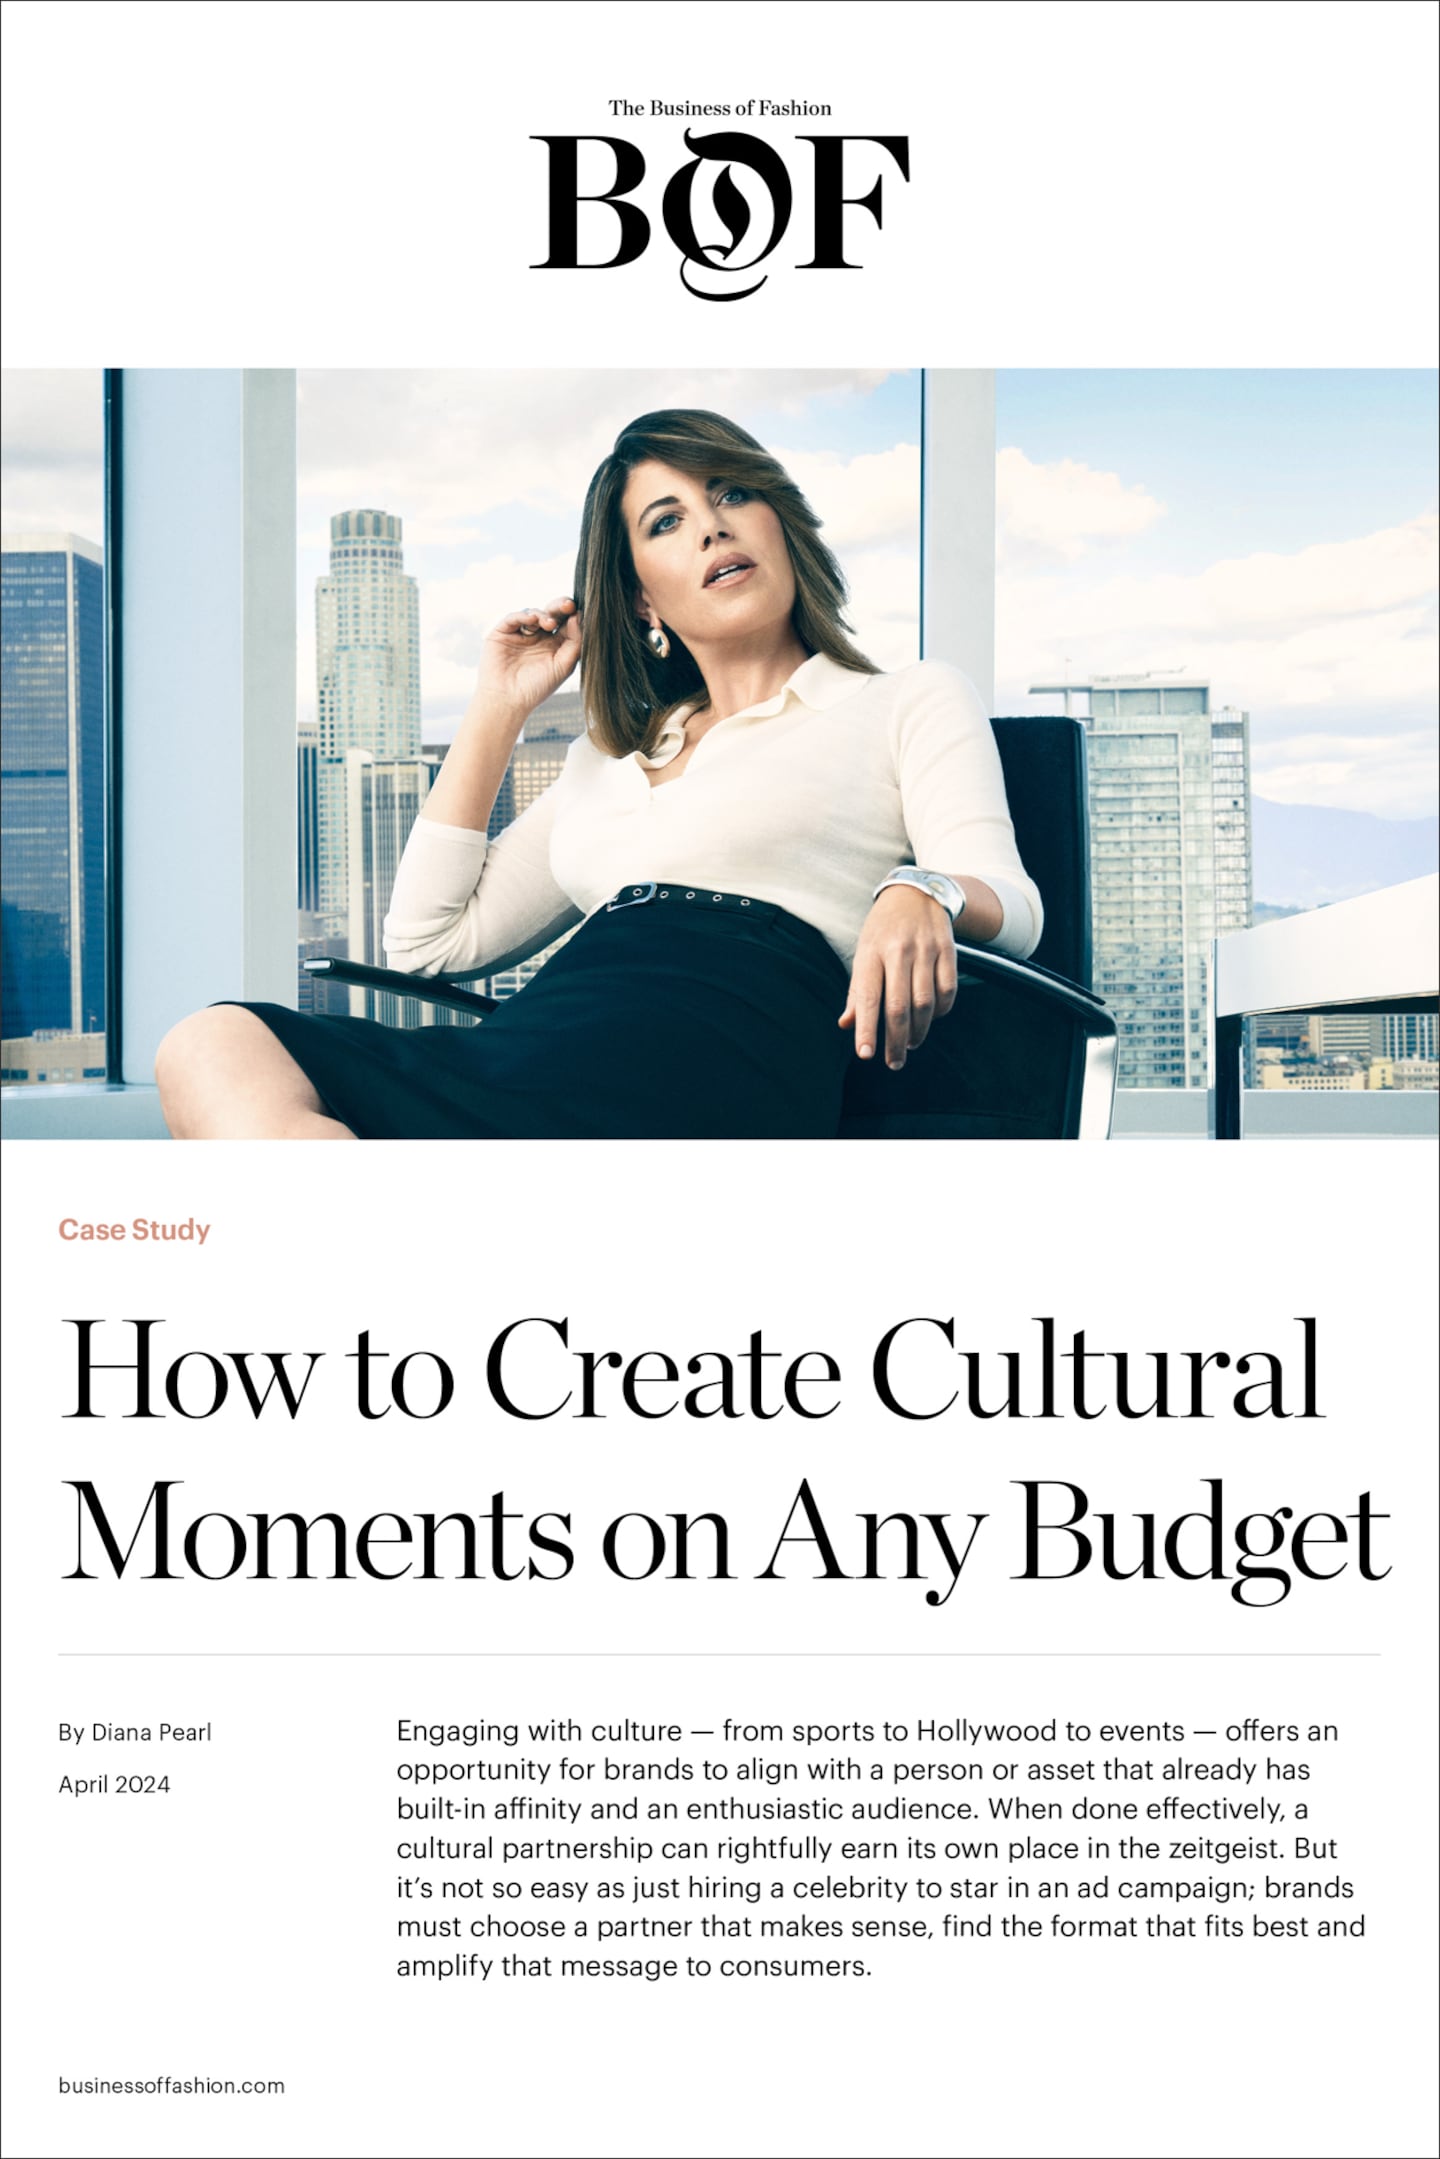 Introducing BoF's latest case study: How to Create Cultural Moments on Any Budget